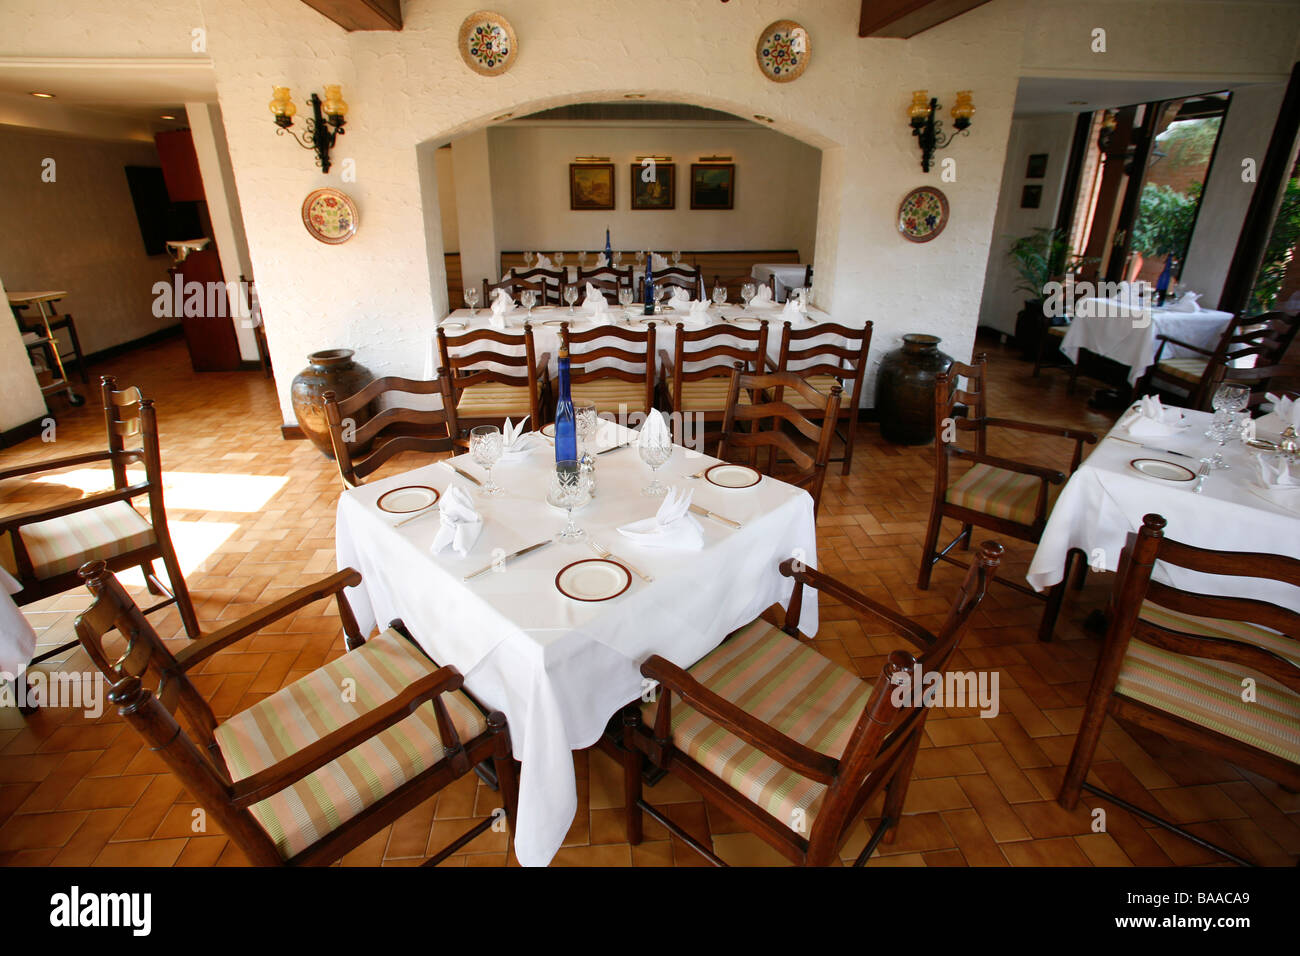 Interior of Italian restaurant with white table cloths Stock Photo